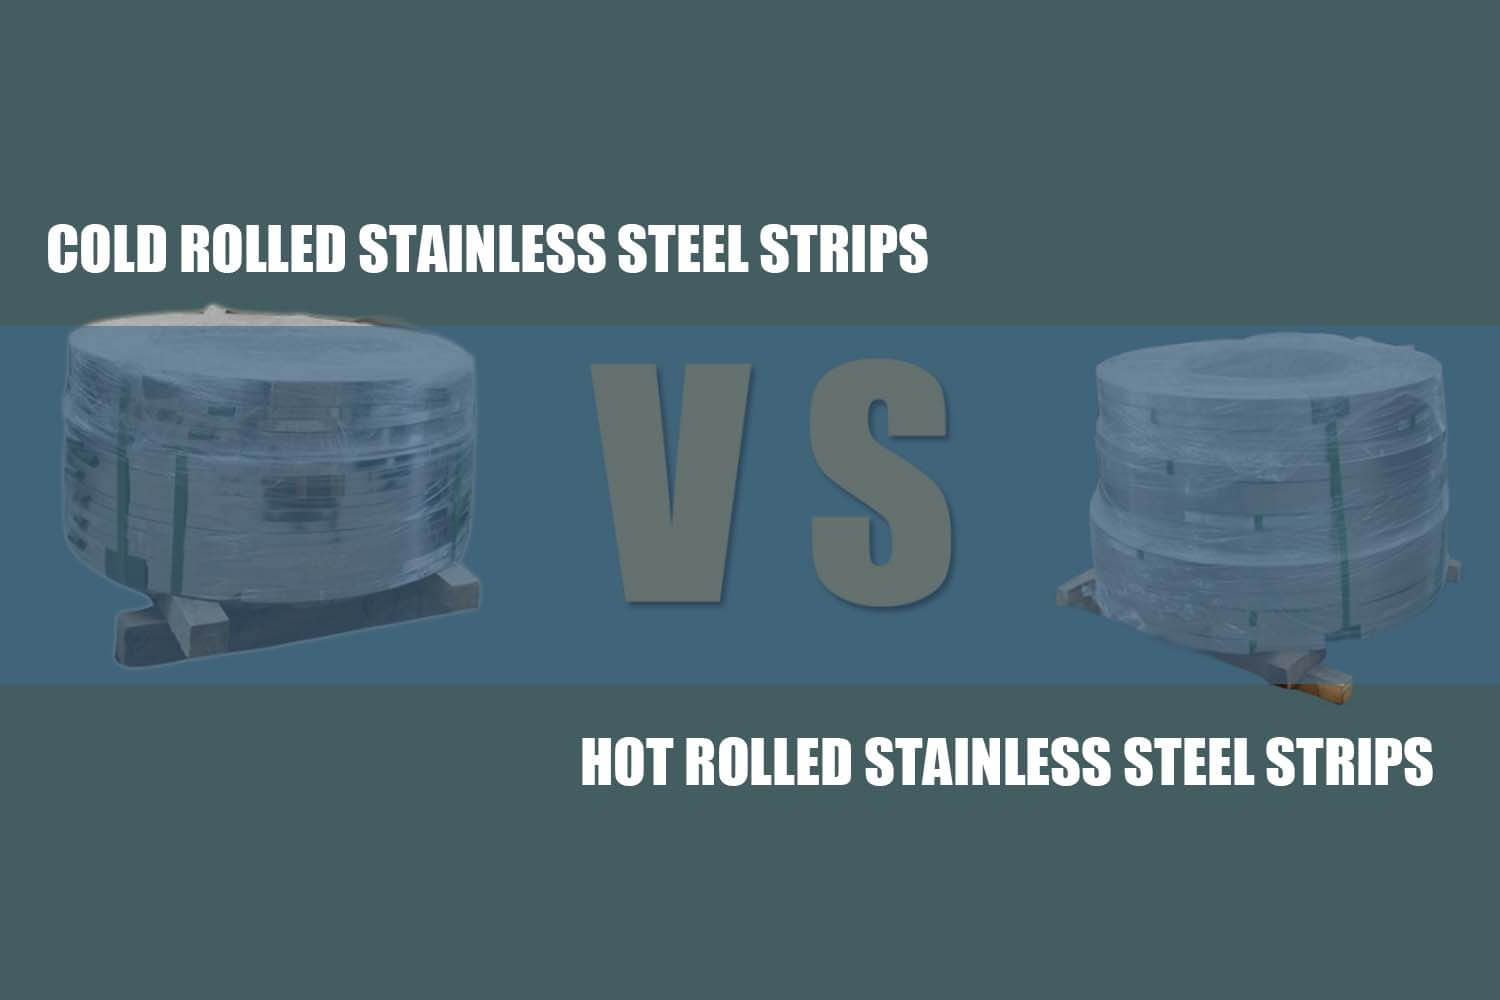 cold rolled stainless steel strips vs hot rolled stainless steel strips